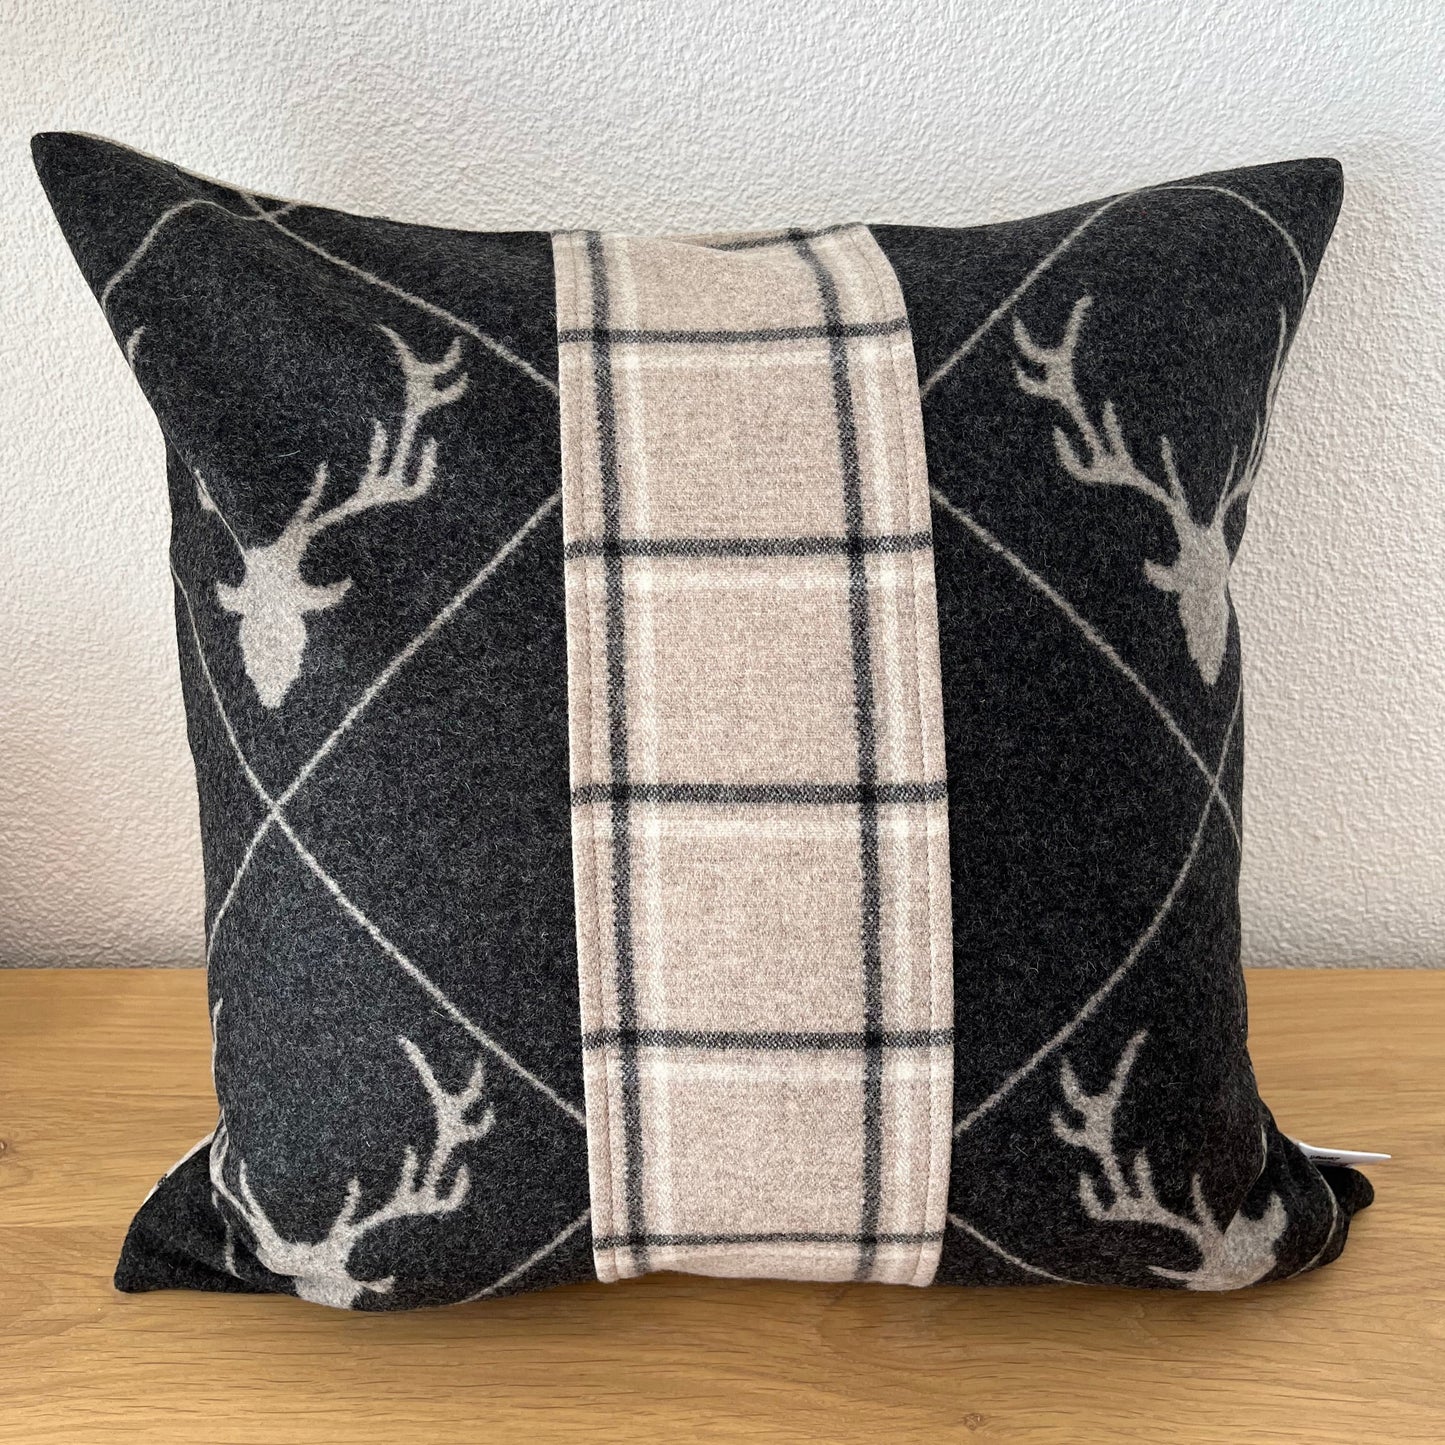 Deer design cushion cover, check pattern centered, red/brown